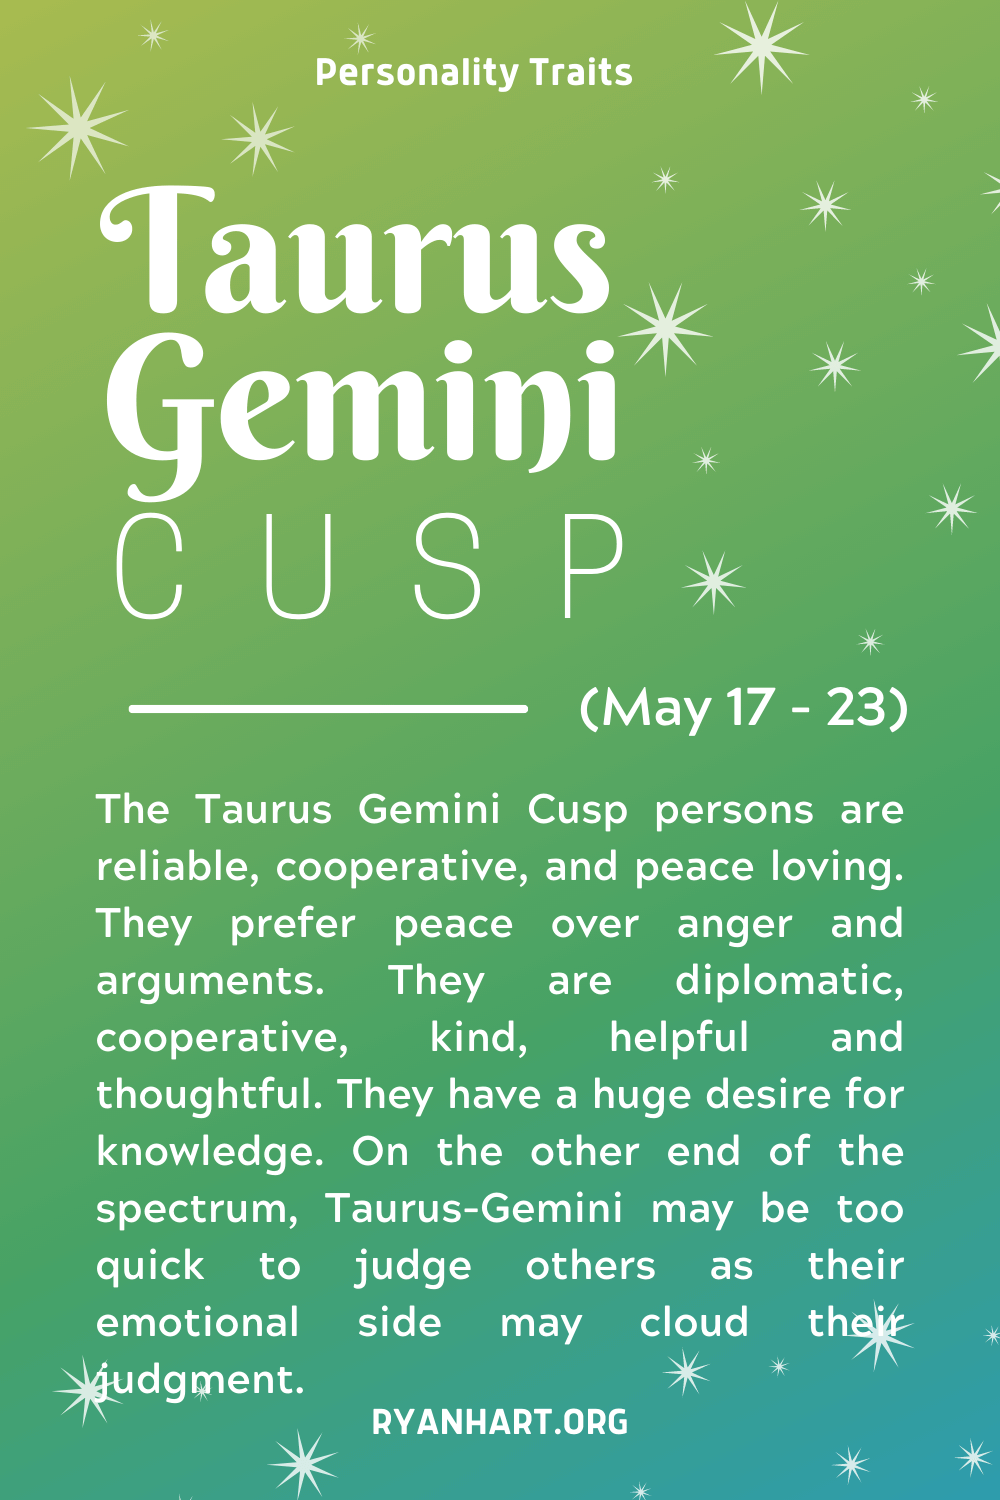 virgo and gemini cancer cusp compatibility